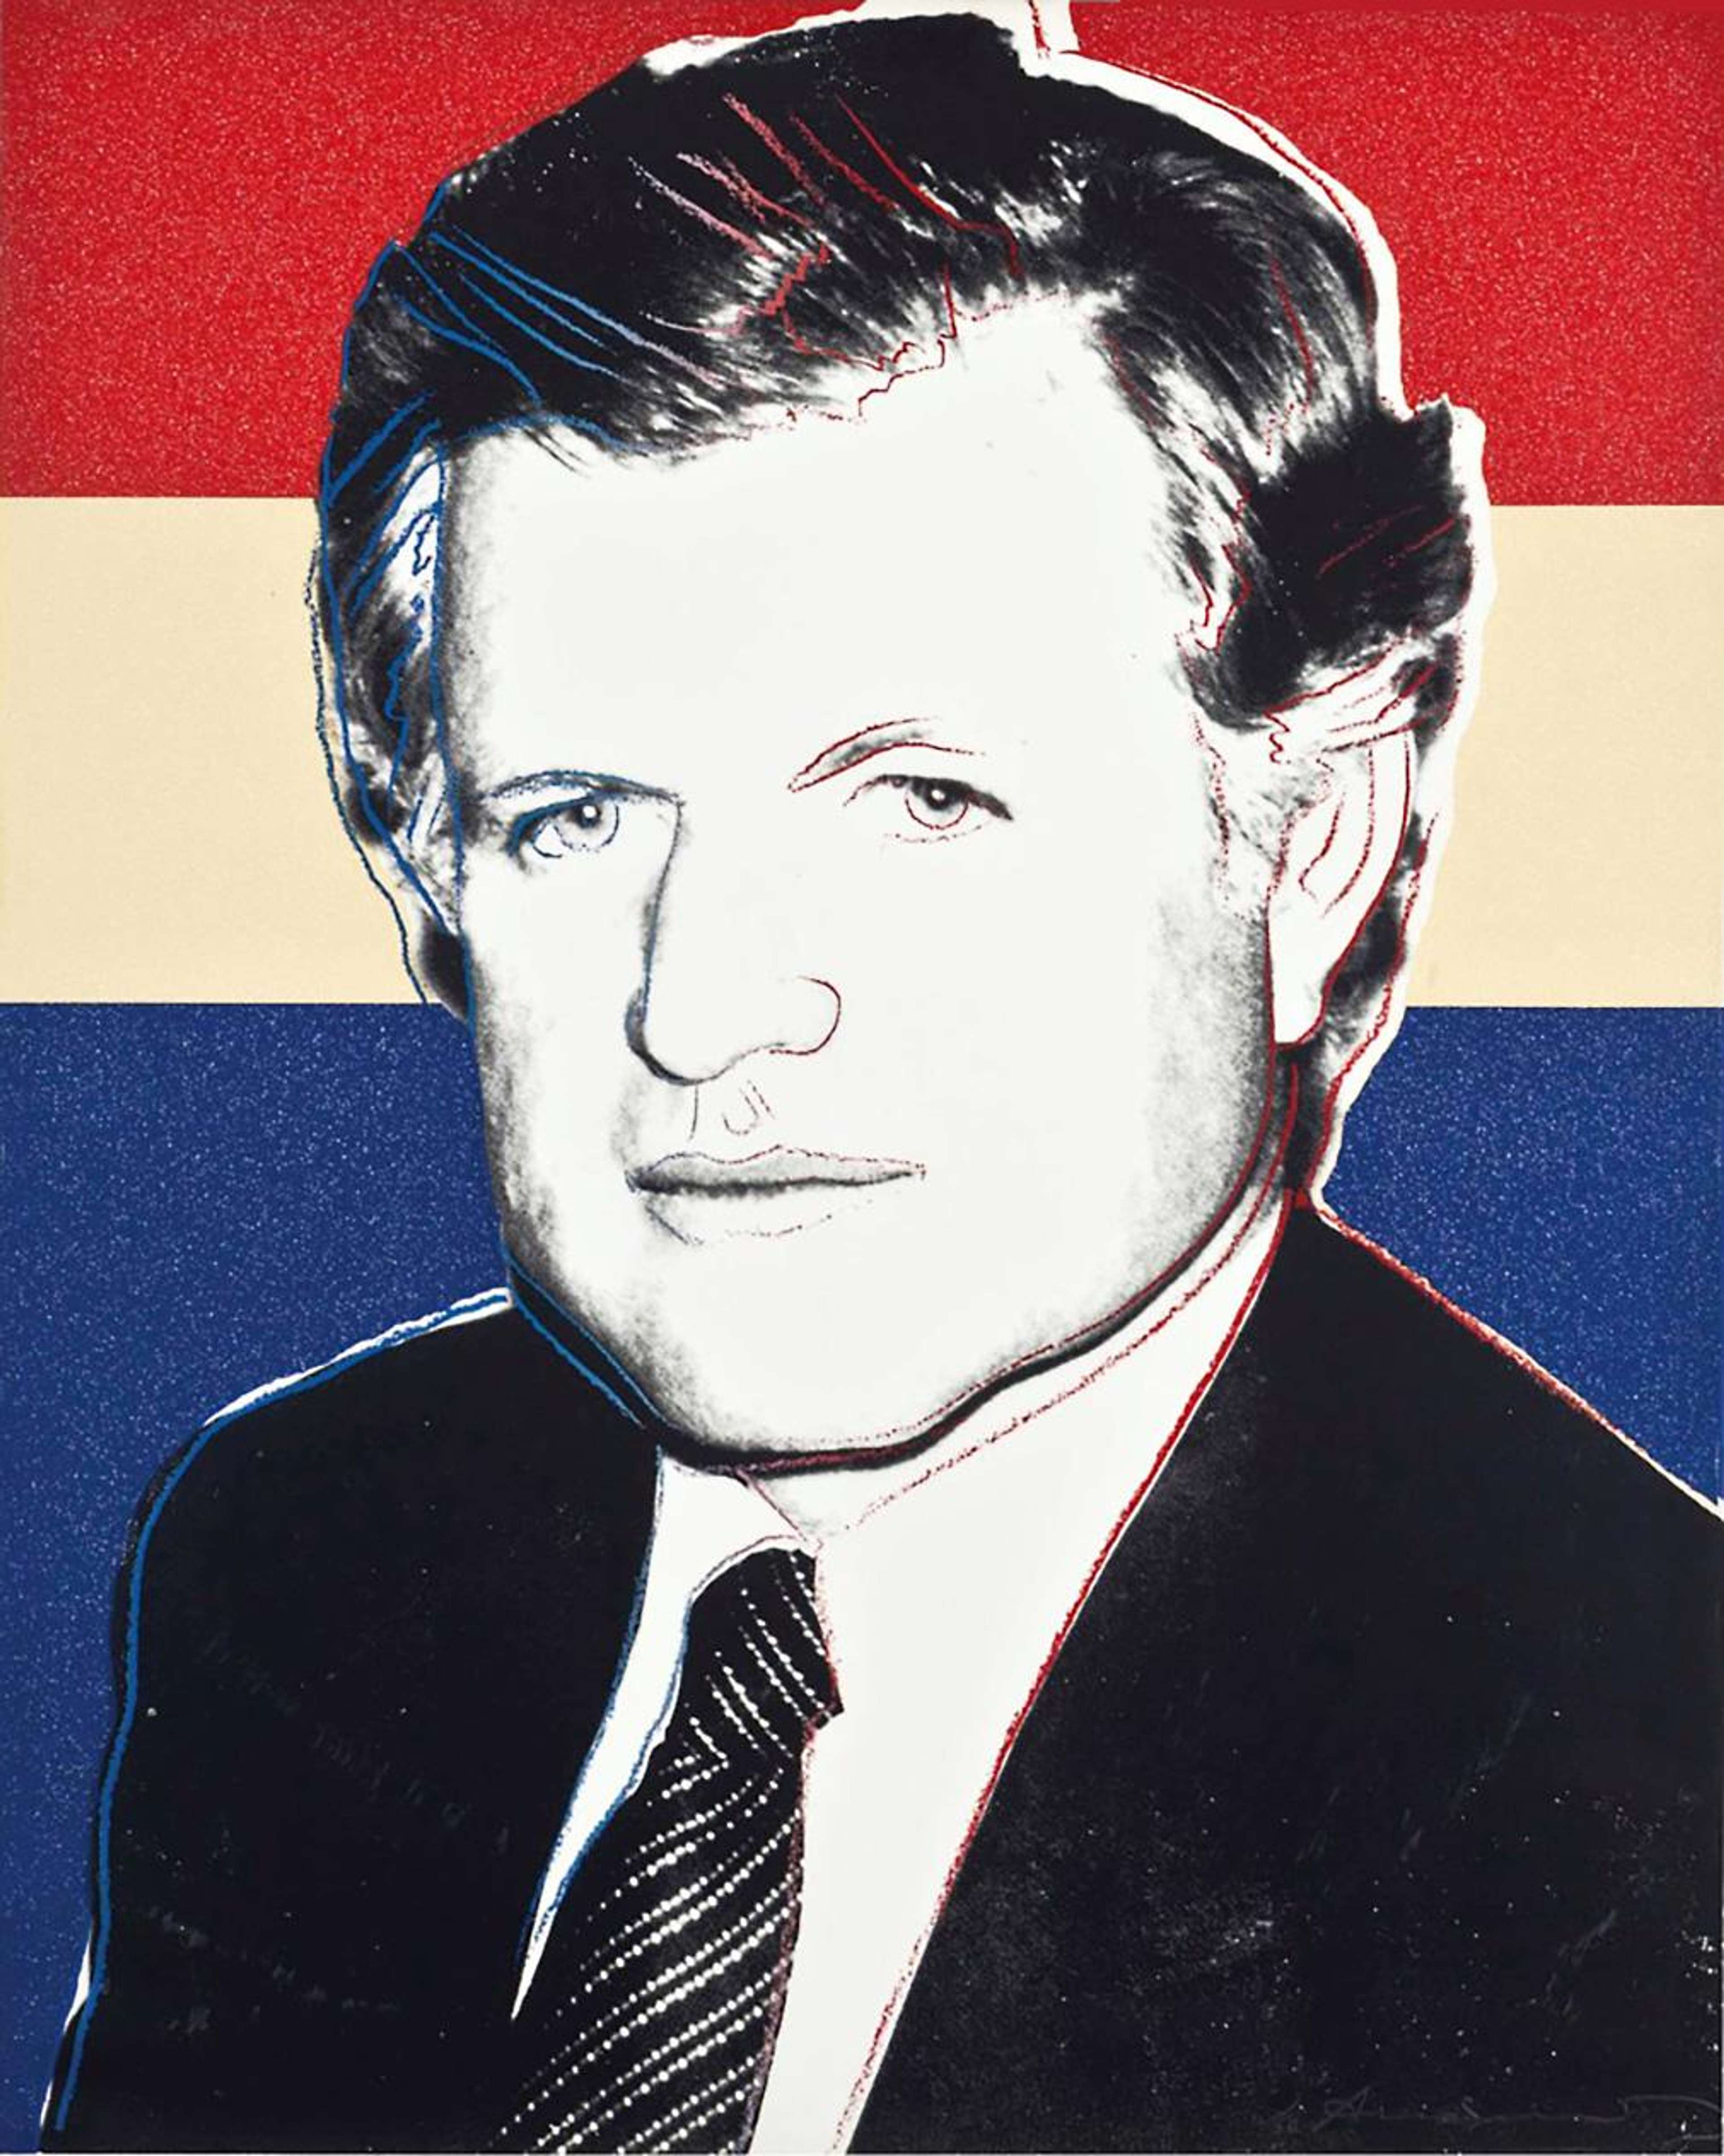 The print shows a portrait of the American politician, Edward Kennedy, posing confidently in a smart suit and tie. Kennedy is rendered in black and white against a striped red white and blue background. Warhol adds colourful gestural lines to the image of Kennedy to delineate his facial features and hair.